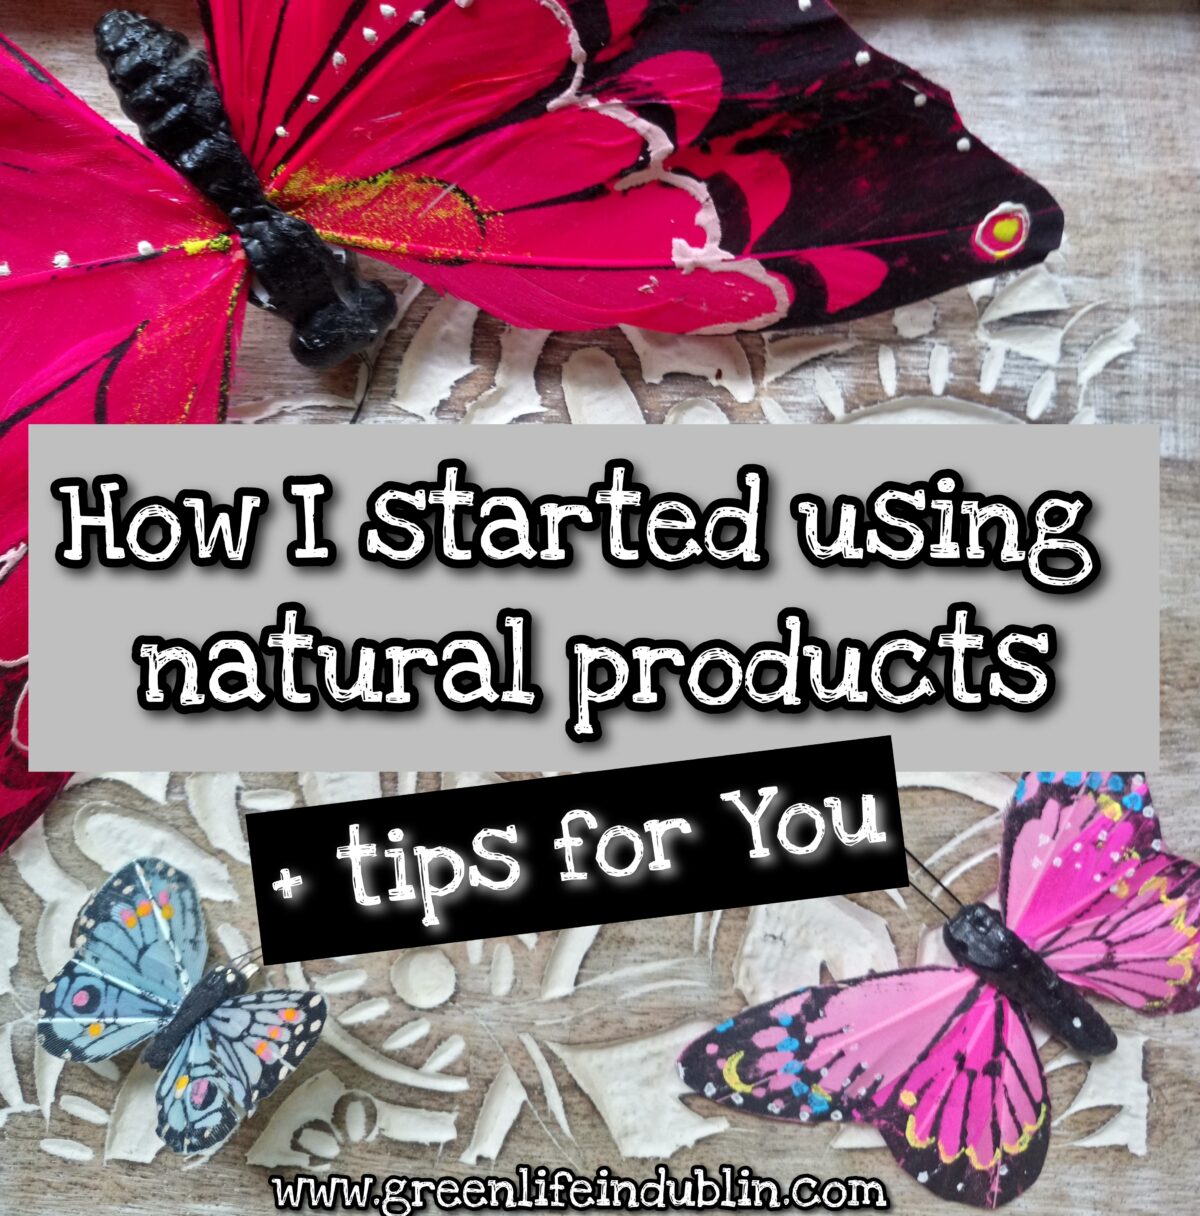 how I started using natural products – Green Life In Dublin